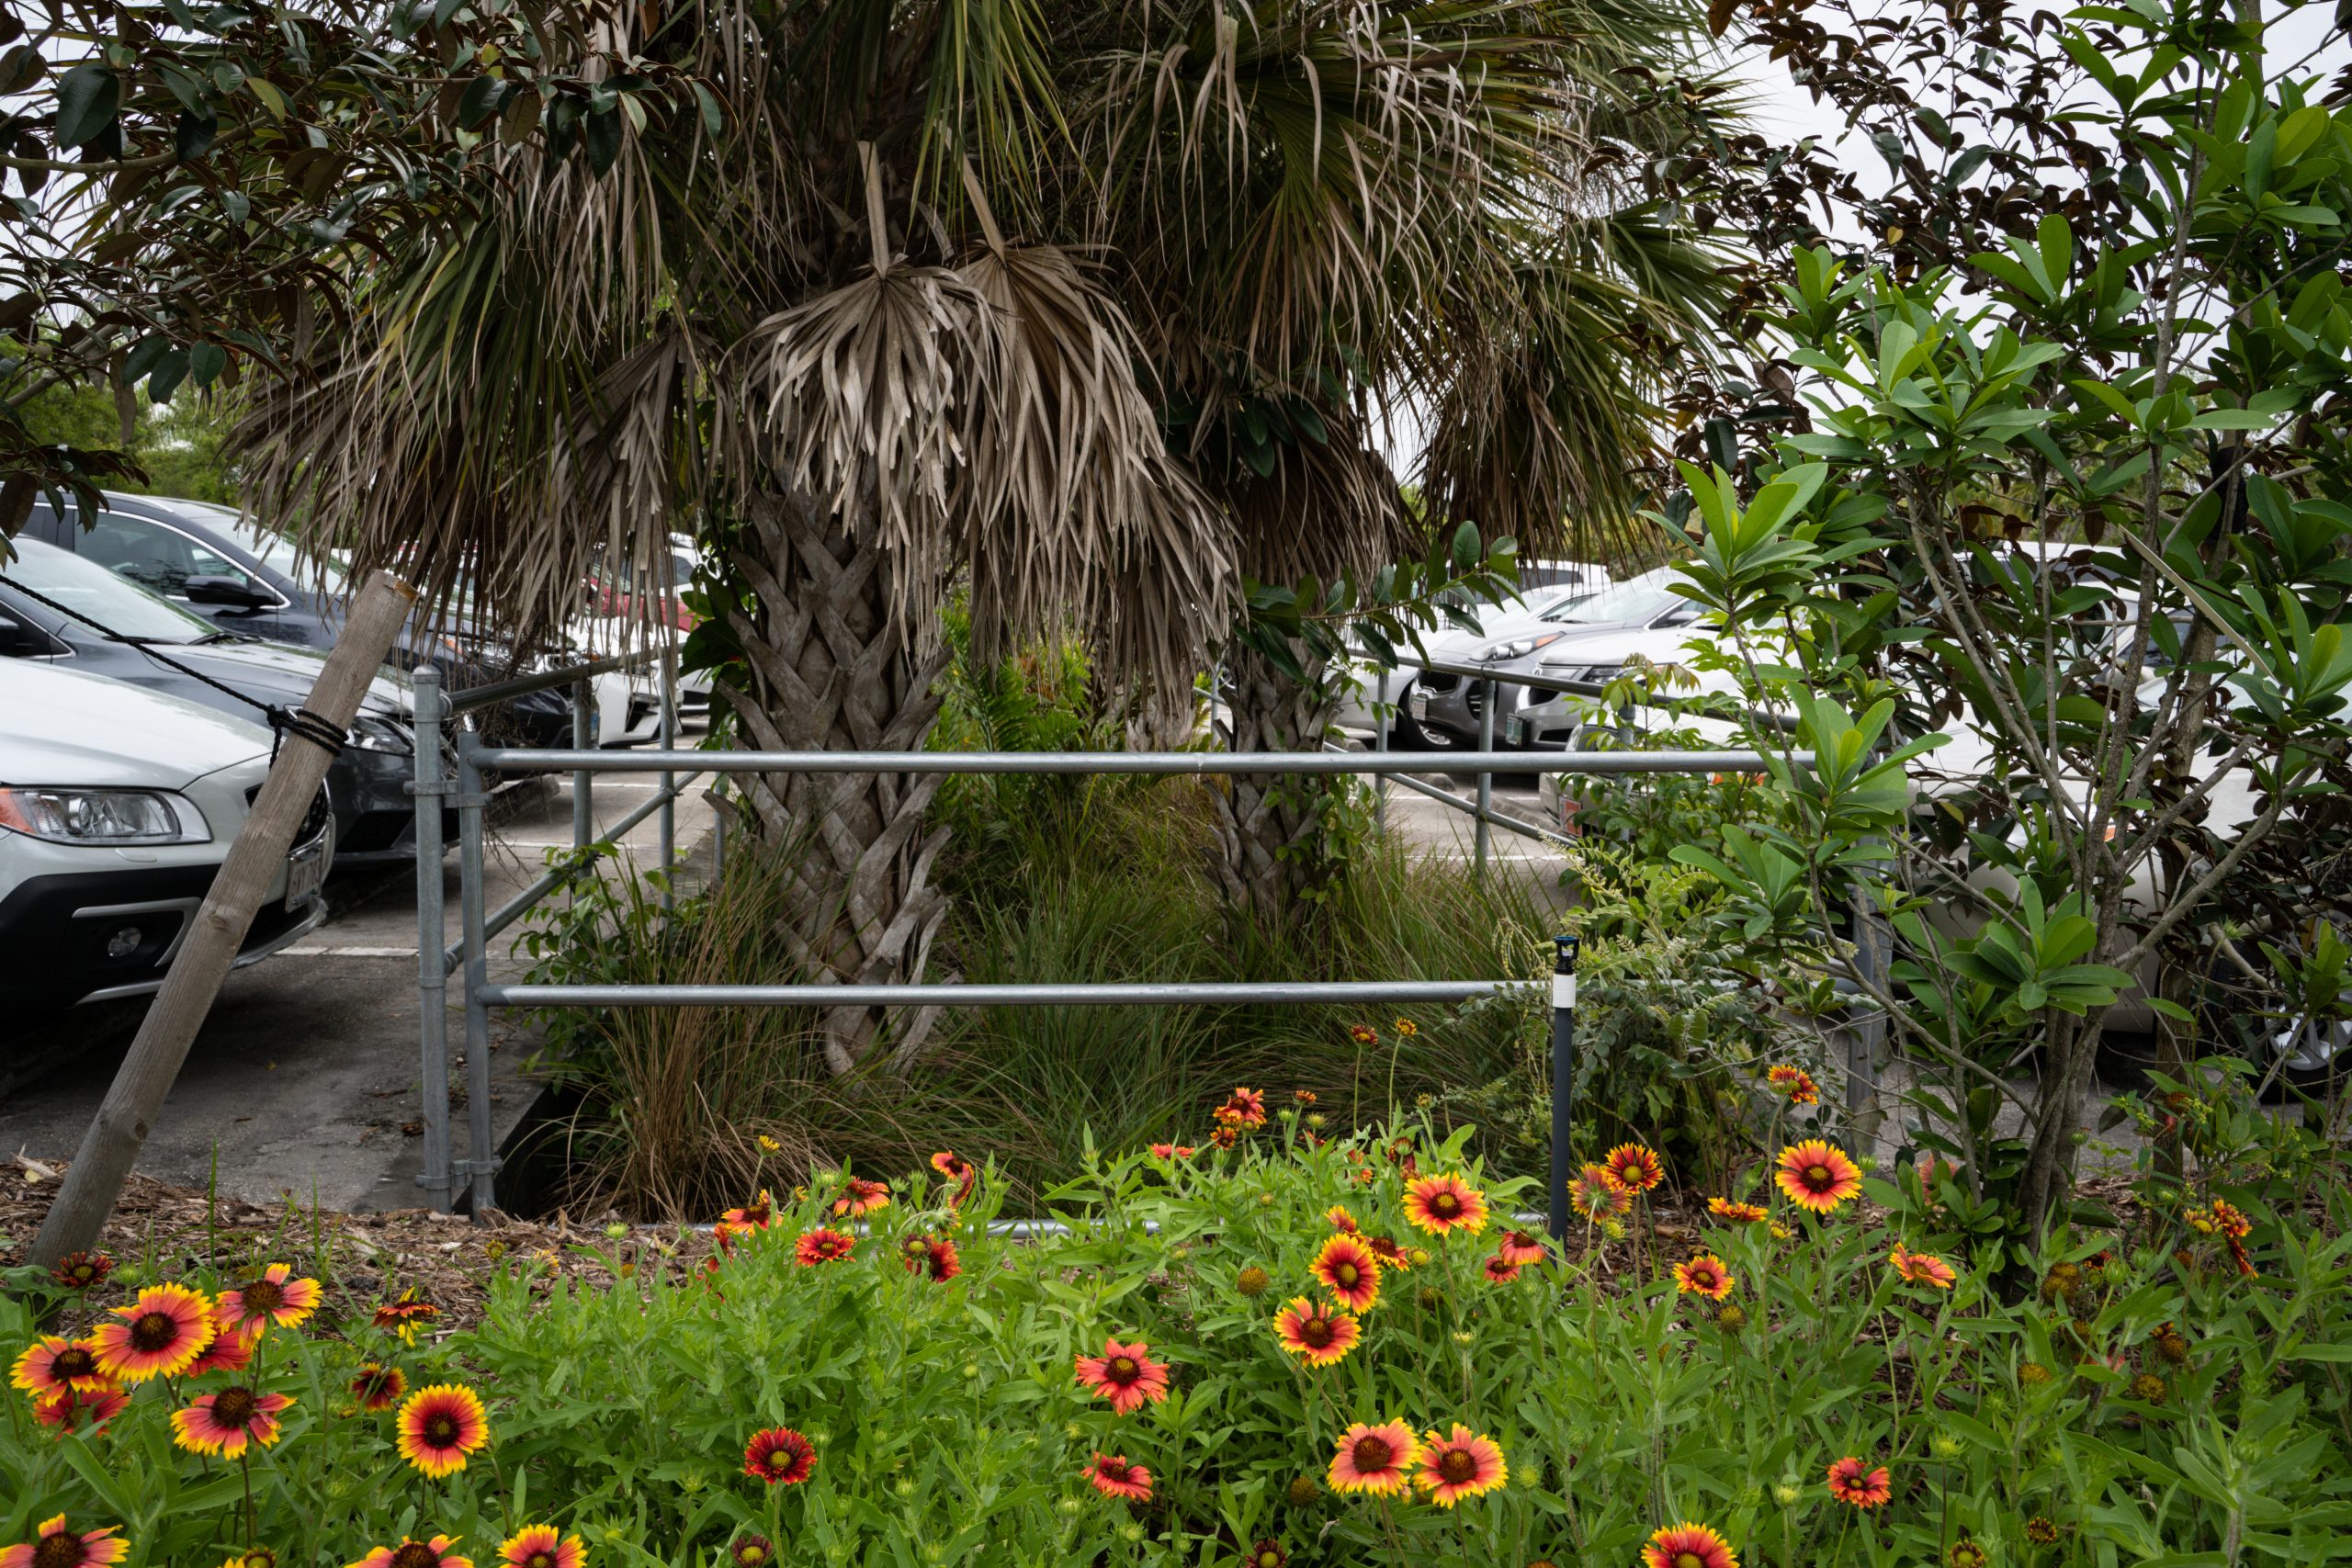 Image of swales that collect rainwater in Naples Botanical Garden's parking lot